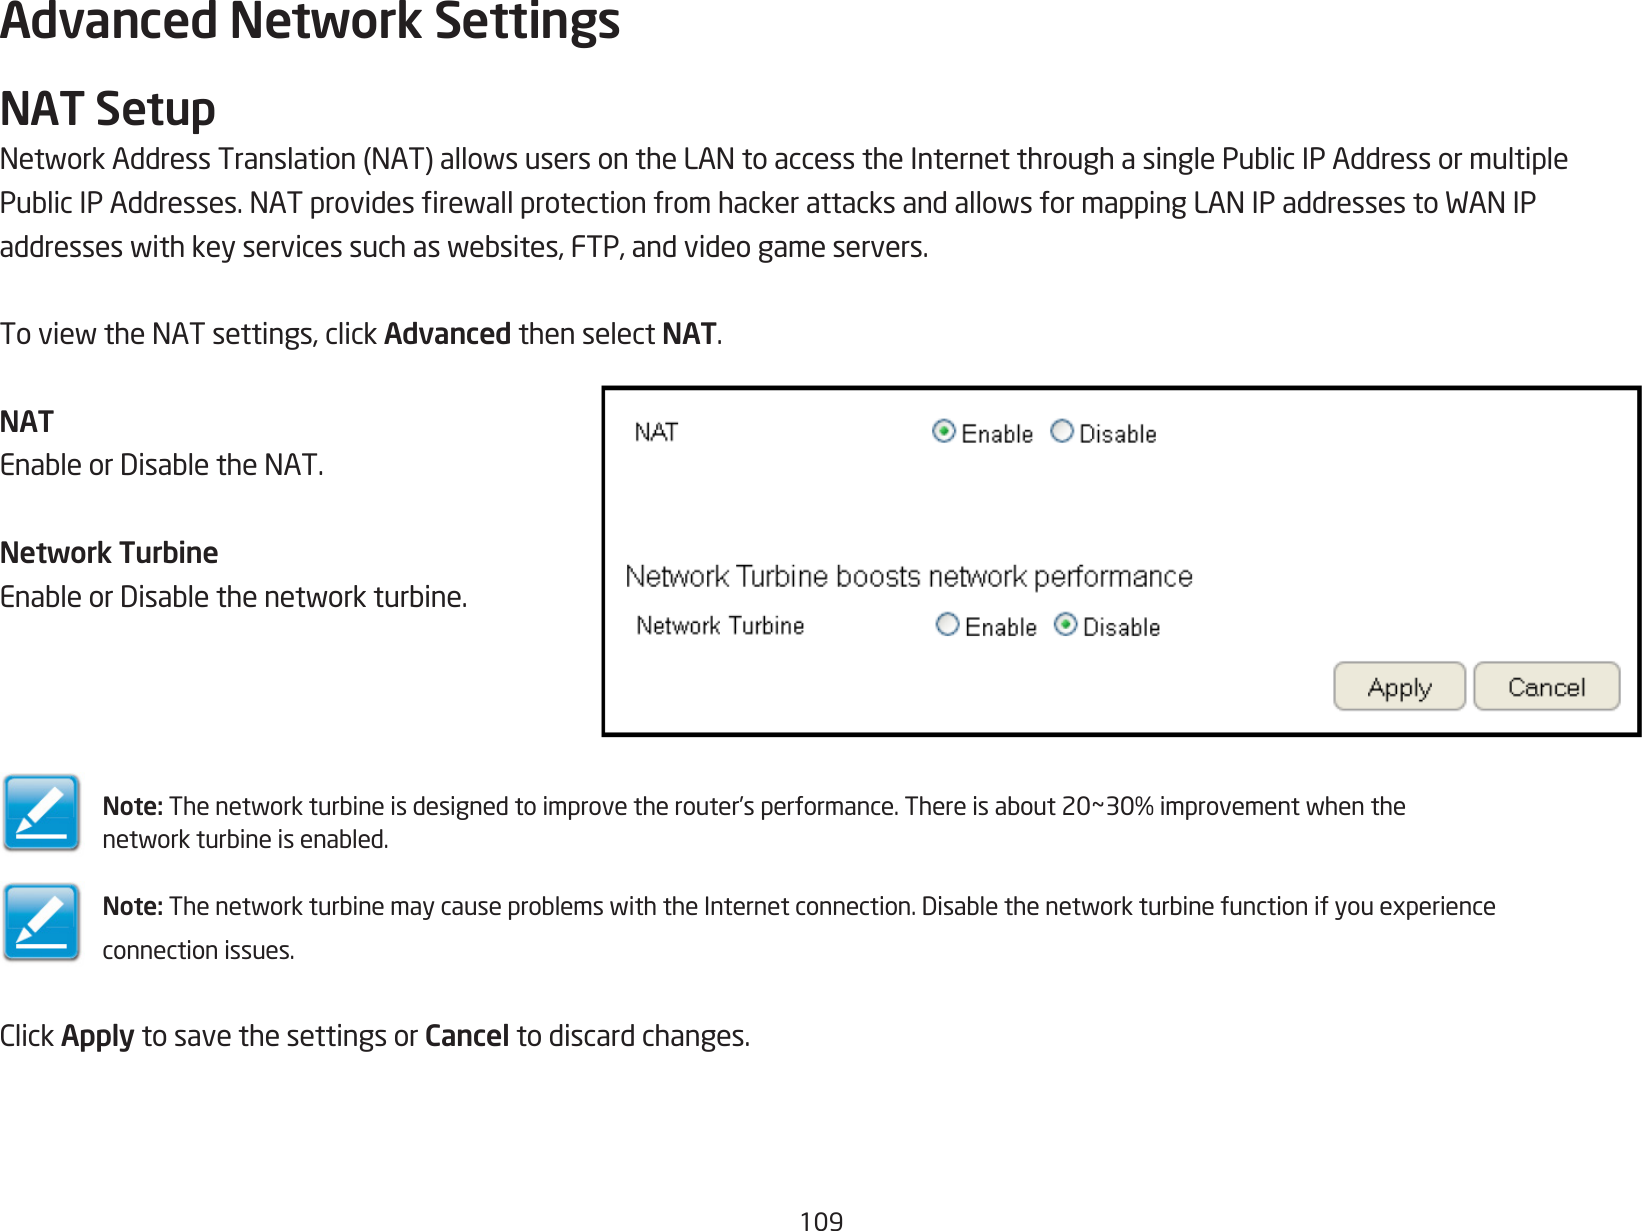 109Advanced Network SettingsNAT SetupNetworkAddressTranslation(NAT)allowsusersontheLANtoaccesstheInternetthroughasinglePublicIPAddressormultiplePublicIPAddresses.NATprovidesrewallprotectionfromhackerattacksandallowsformappingLANIPaddressestoWANIPaddresseswithkeyservicessuchaswebsites,FTP,andvideogameservers.ToviewtheNATsettings,clickAdvanced then select NAT.NATEnableorDisabletheNAT.Network TurbineEnableorDisablethenetworkturbine.Note: Thenetworkturbineisdesignedtoimprovetherouter’sperformance.Thereisabout20~30%improvementwhenthenetworkturbineisenabled.Note: ThenetworkturbinemaycauseproblemswiththeInternetconnection.Disablethenetworkturbinefunctionifyouexperienceconnection issues.ClickApply to save the settings or Cancel to discard changes.